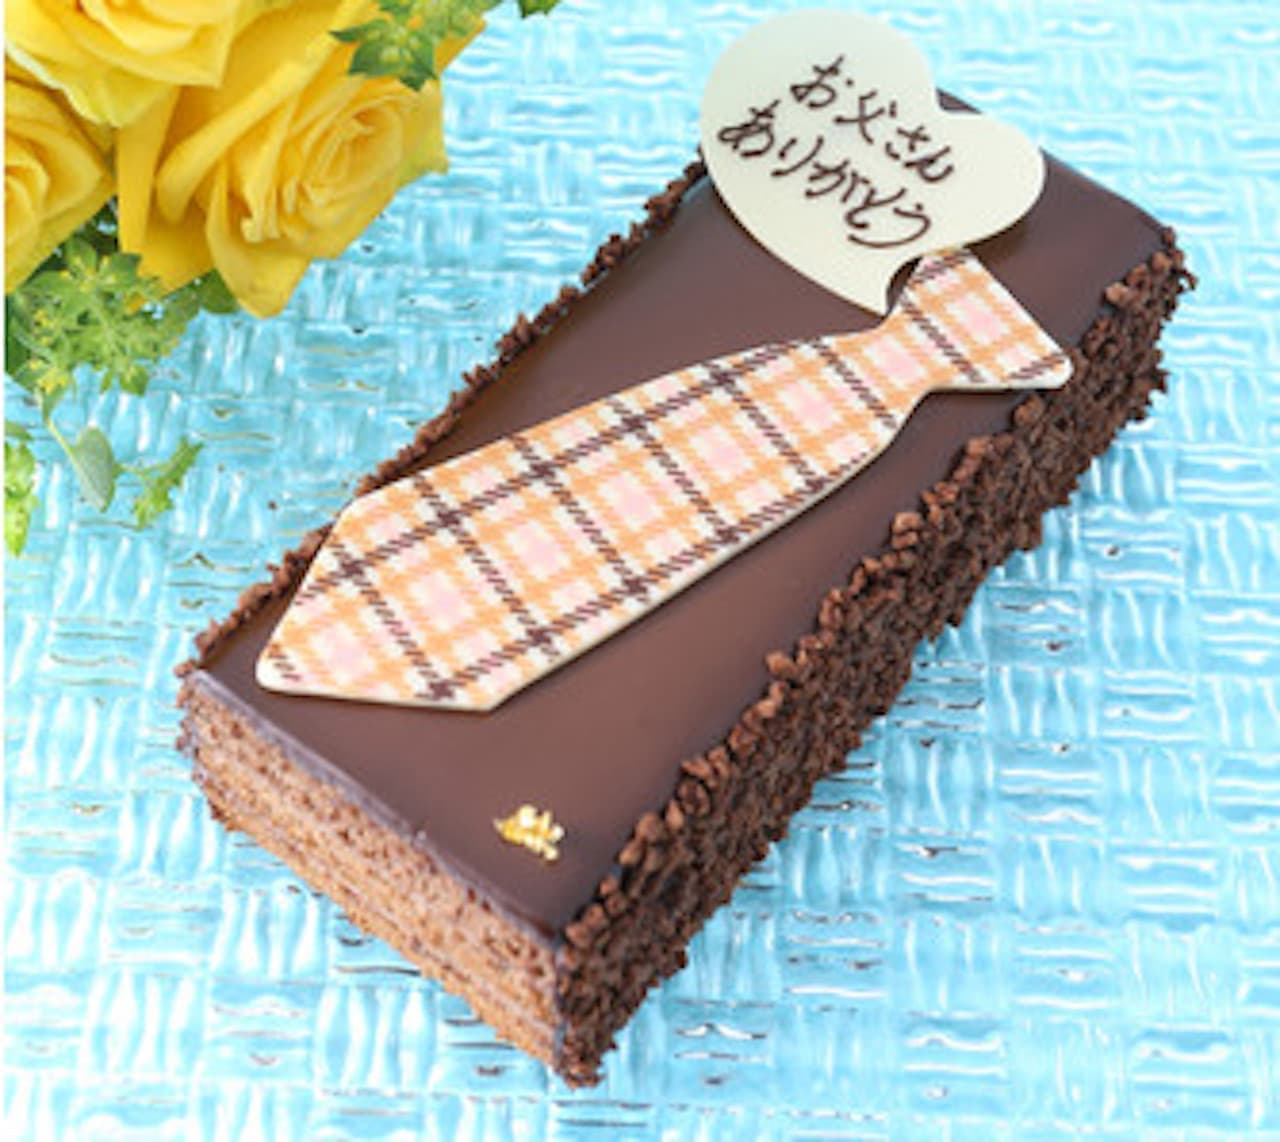 Antenor Father's Day Limited Cake "Father's Day Belgian Chocolat Cake"